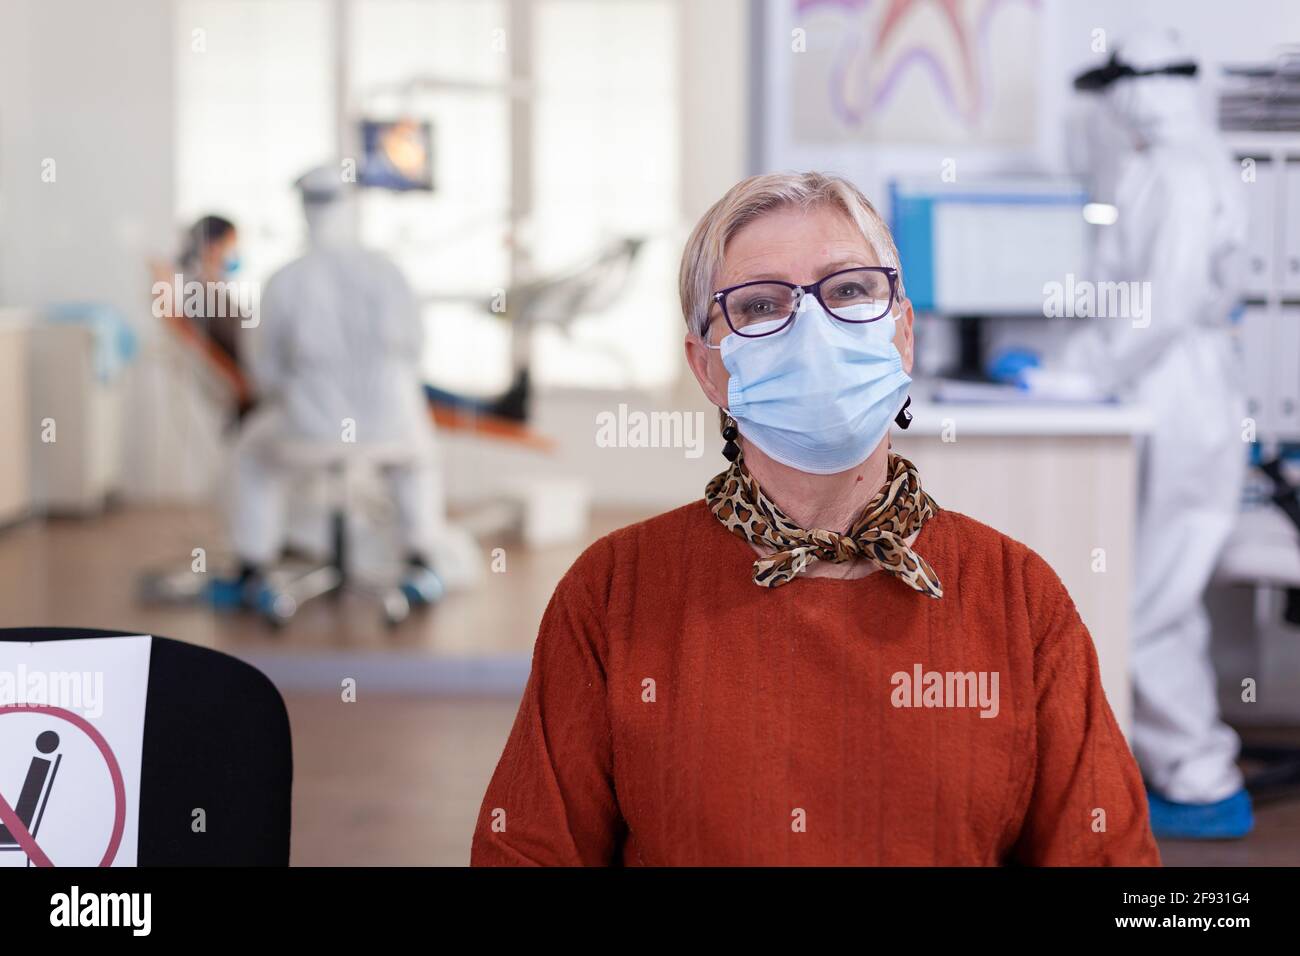 Senior woman in dental clinic wearing face mask looking at camera wainting for consultation during global pandemic with coronavirus. Concept of new normal dentist visit in covid-19. outbreak. Stock Photo